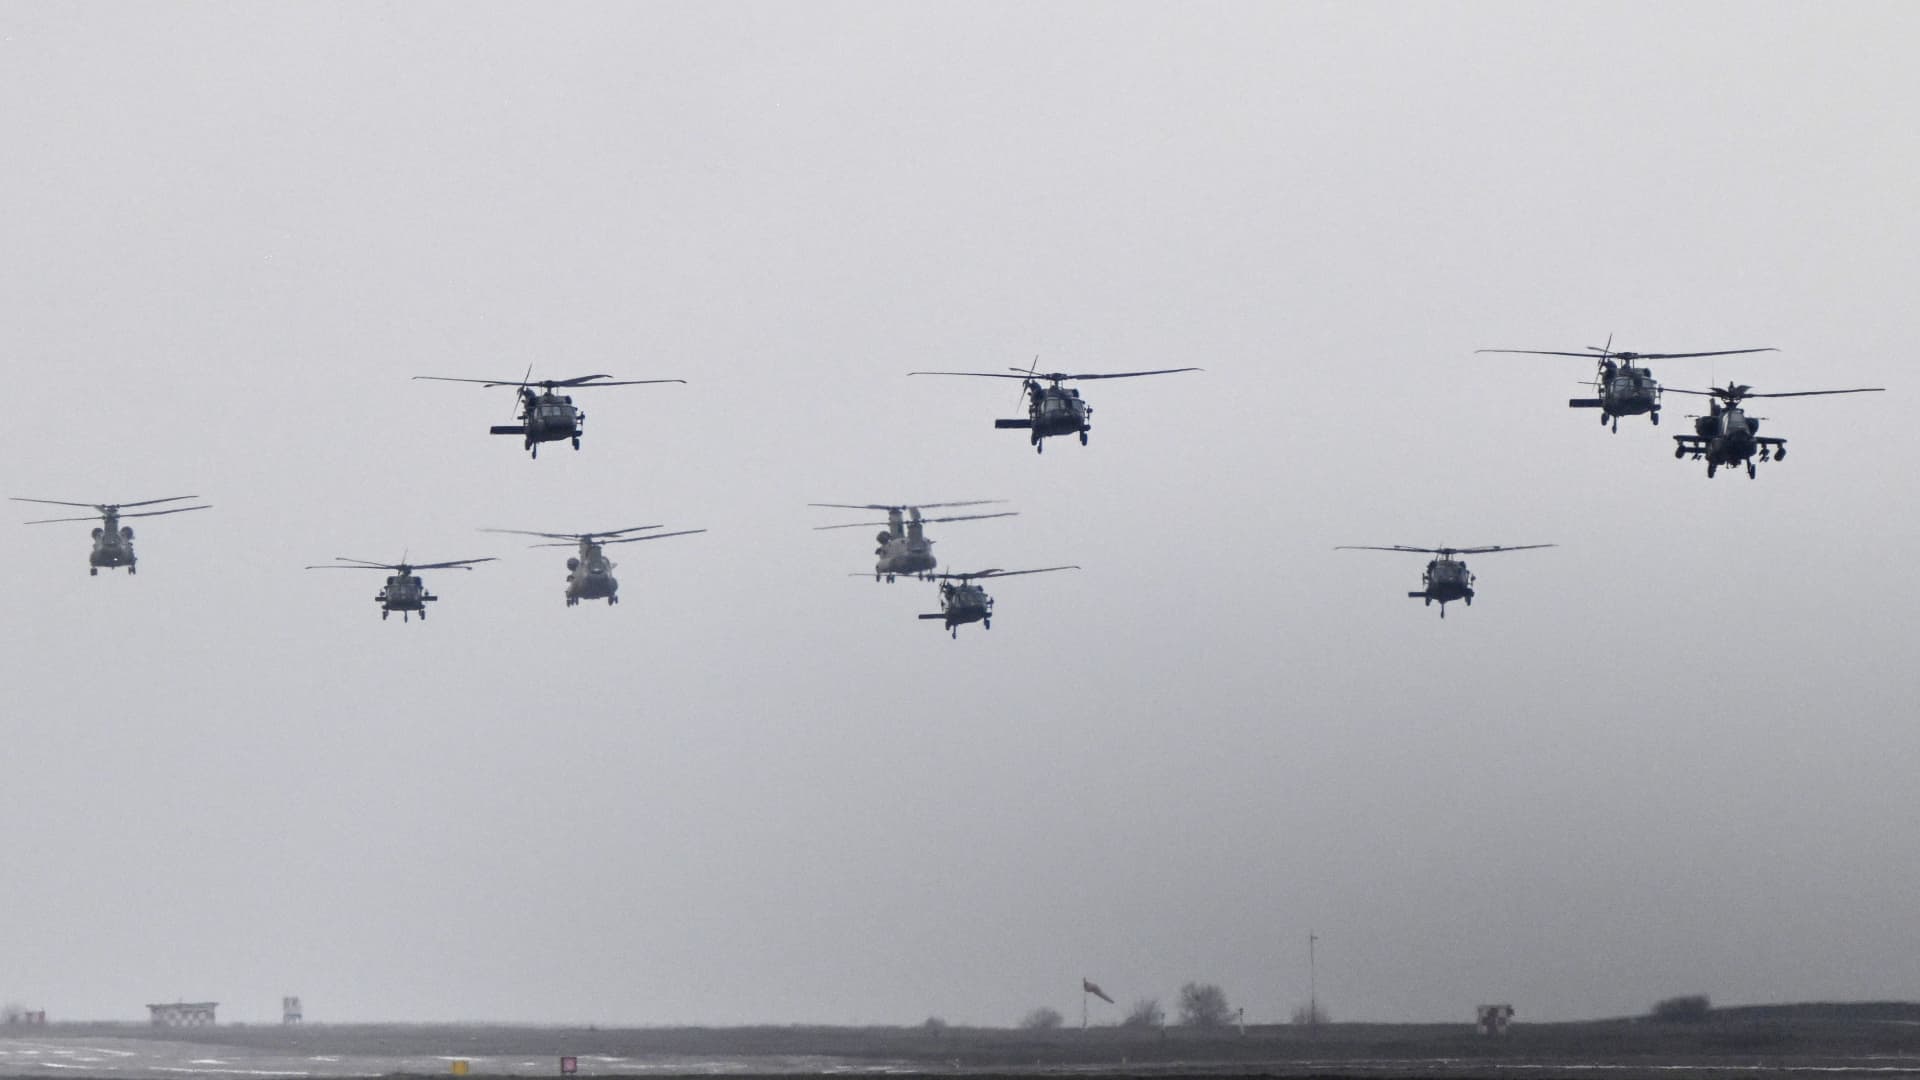 Different types of helicopters, among them Chinook, Black Hawk and Apache, fly during the final display formation as part of the rotation of US troops of the US Army 101 Airborne division at Mihail Kogalniceanu Air Base (RoAF 57th Air Base) near Constanta, Romania on March 31, 2023. 